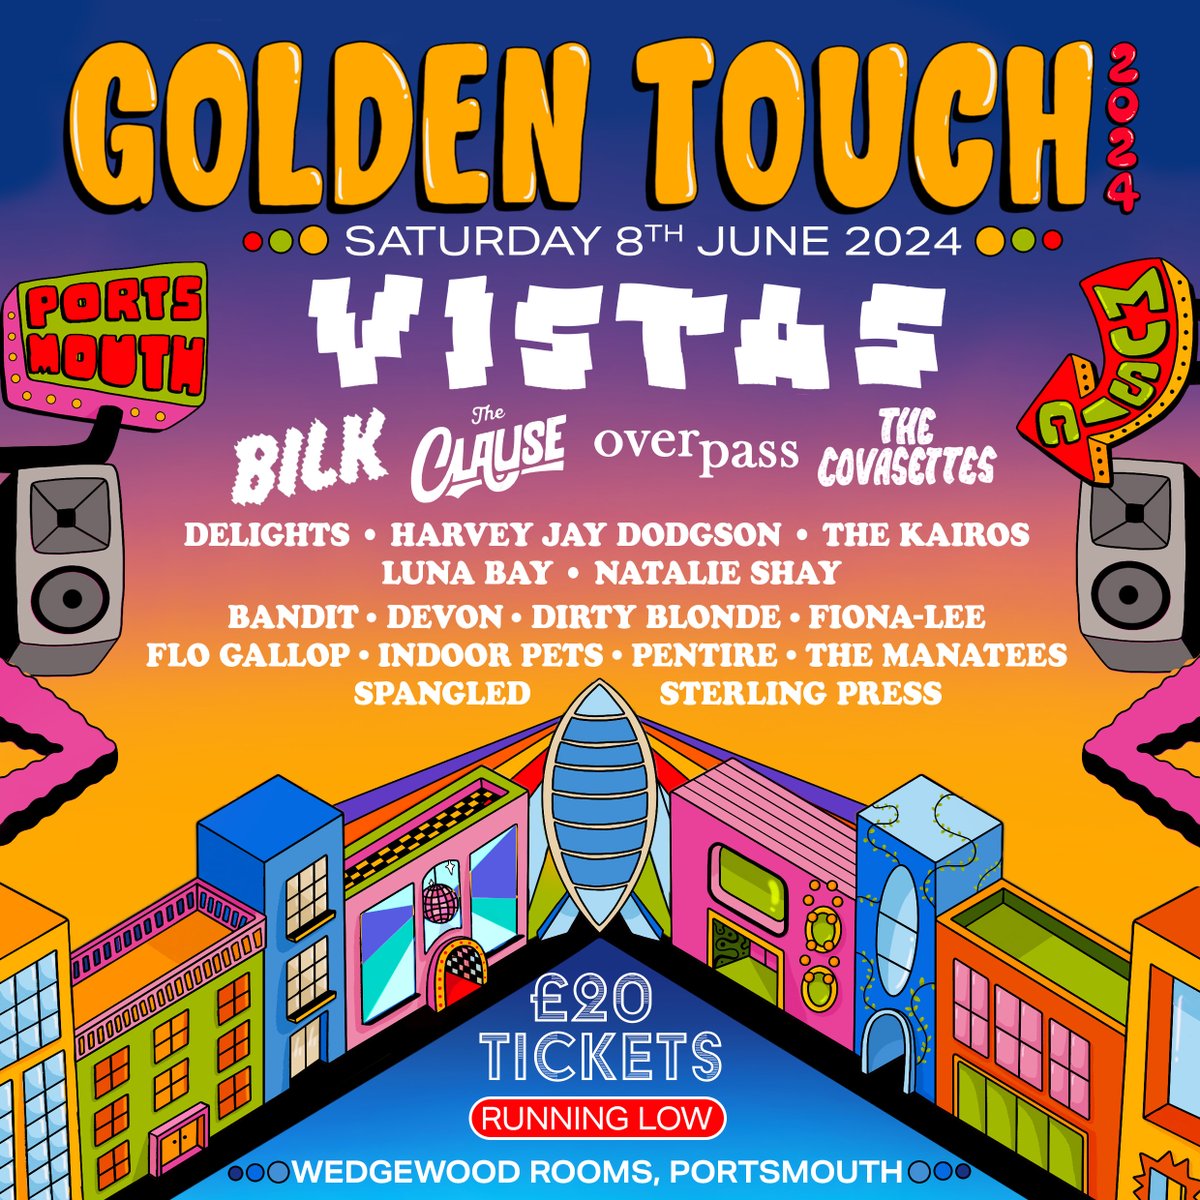 .@goldentouchfest is just round the corner and tickets are flying out! Join @vistasmusic, @theclauseuk, @TheKairos1, @NatalieShay_, @IndoorPets plus loads more on 8th June😎 20 bands, 2 stages, 0 clashes 👉 wedgewood-rooms.co.uk 👈